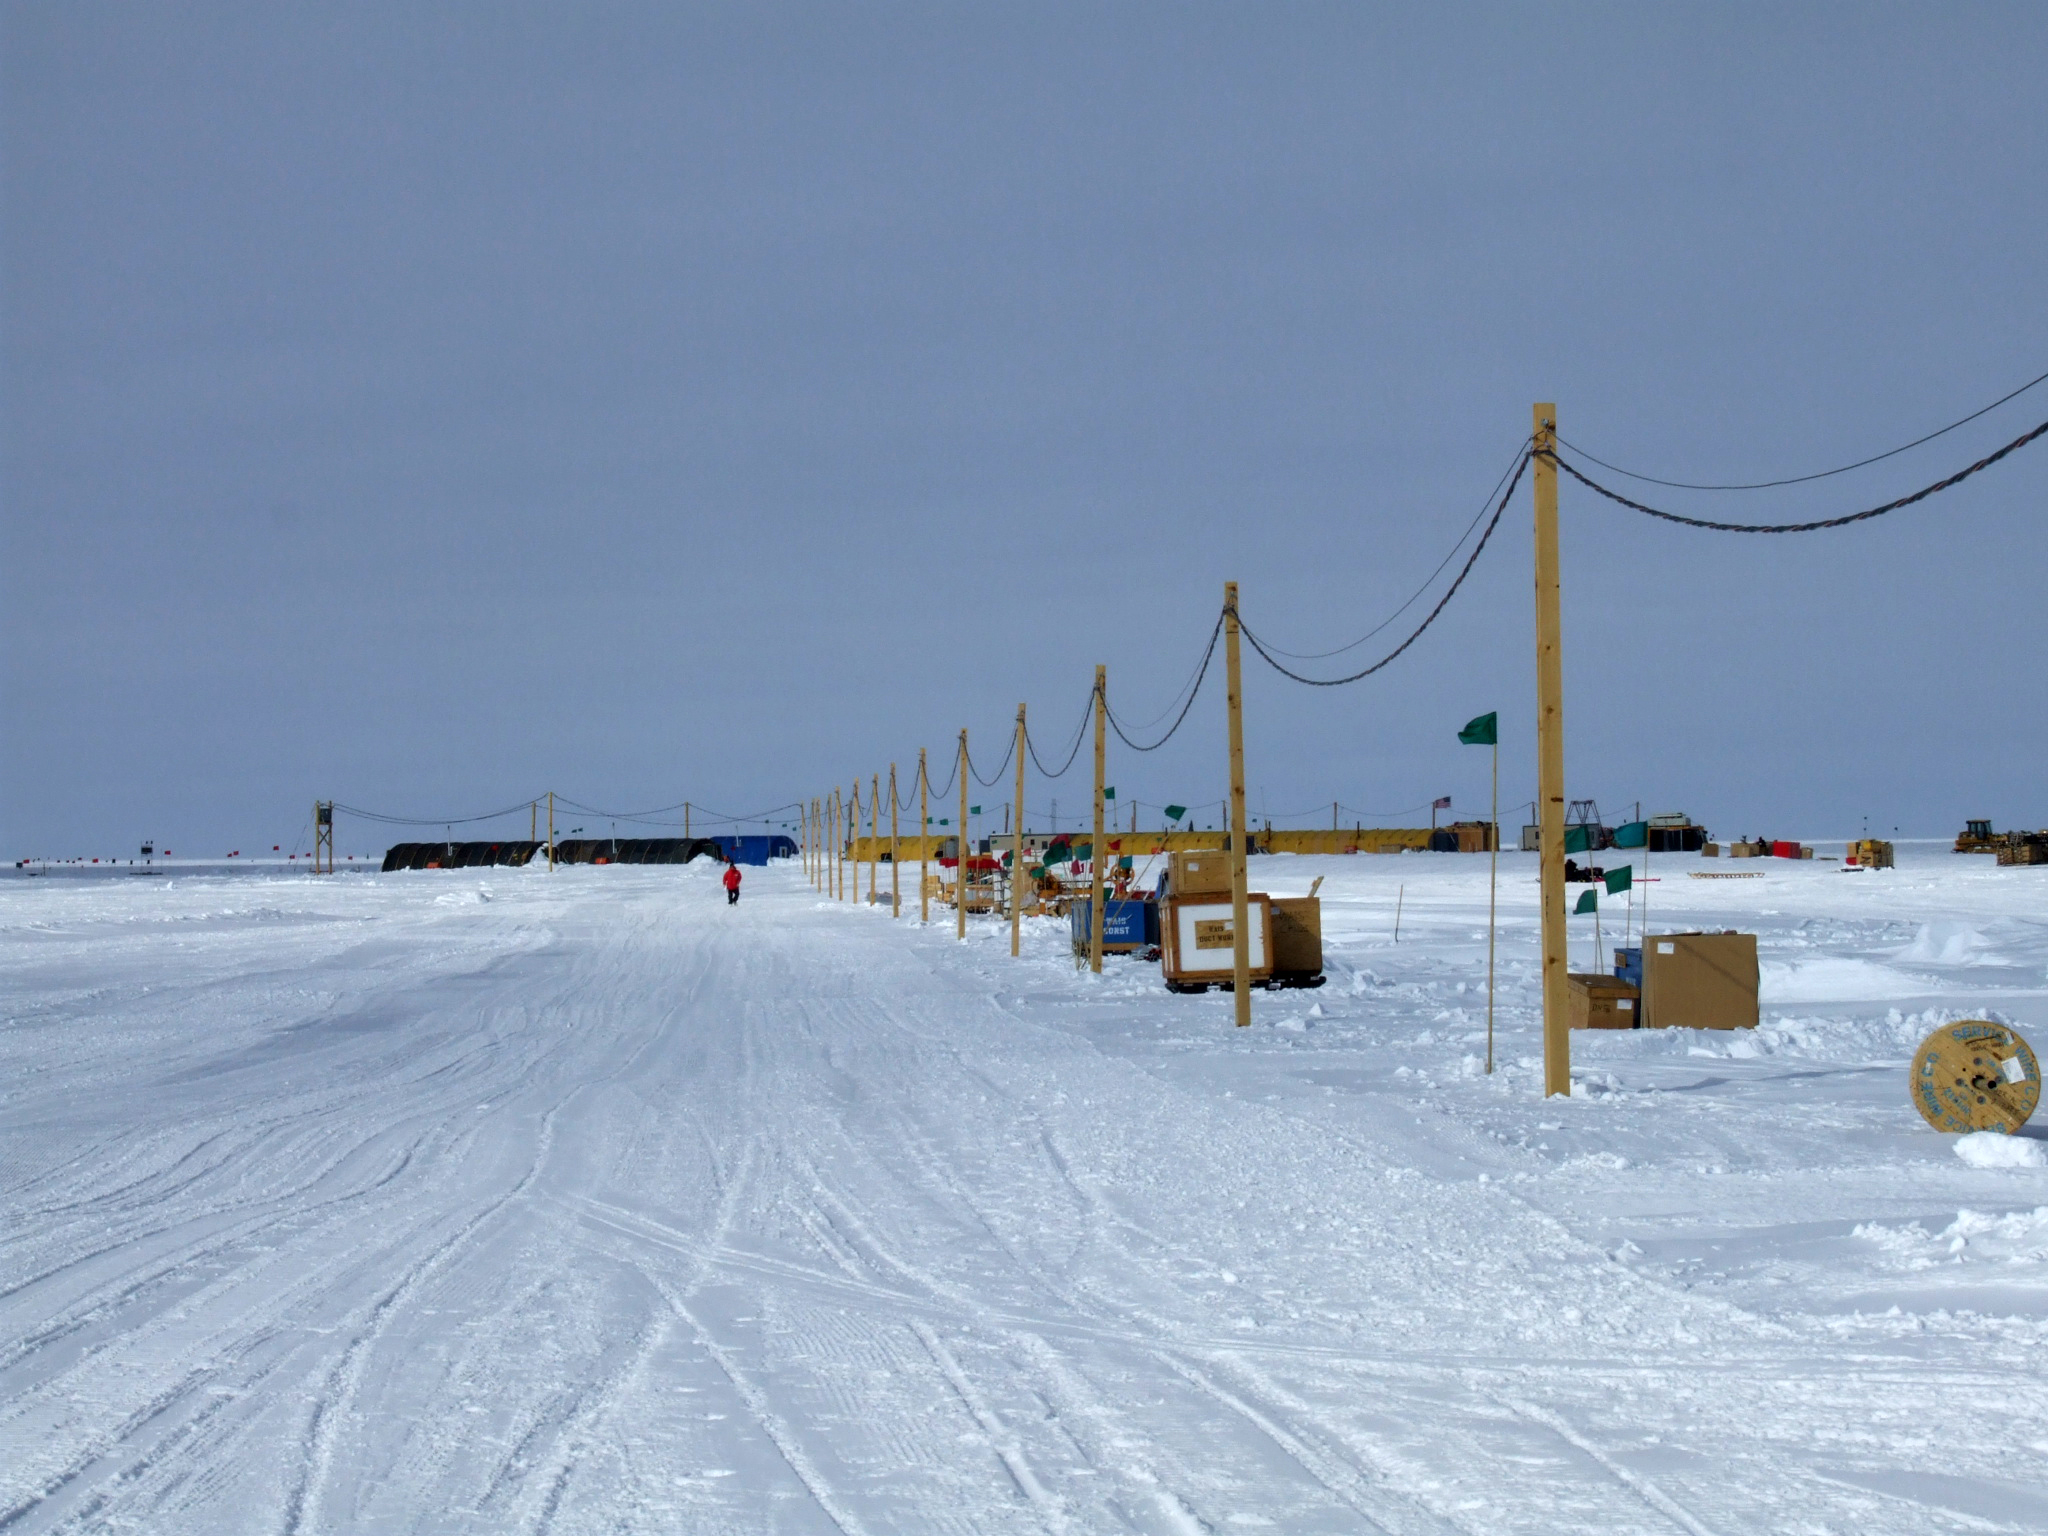 A line of electrical poles are erected in the snow.